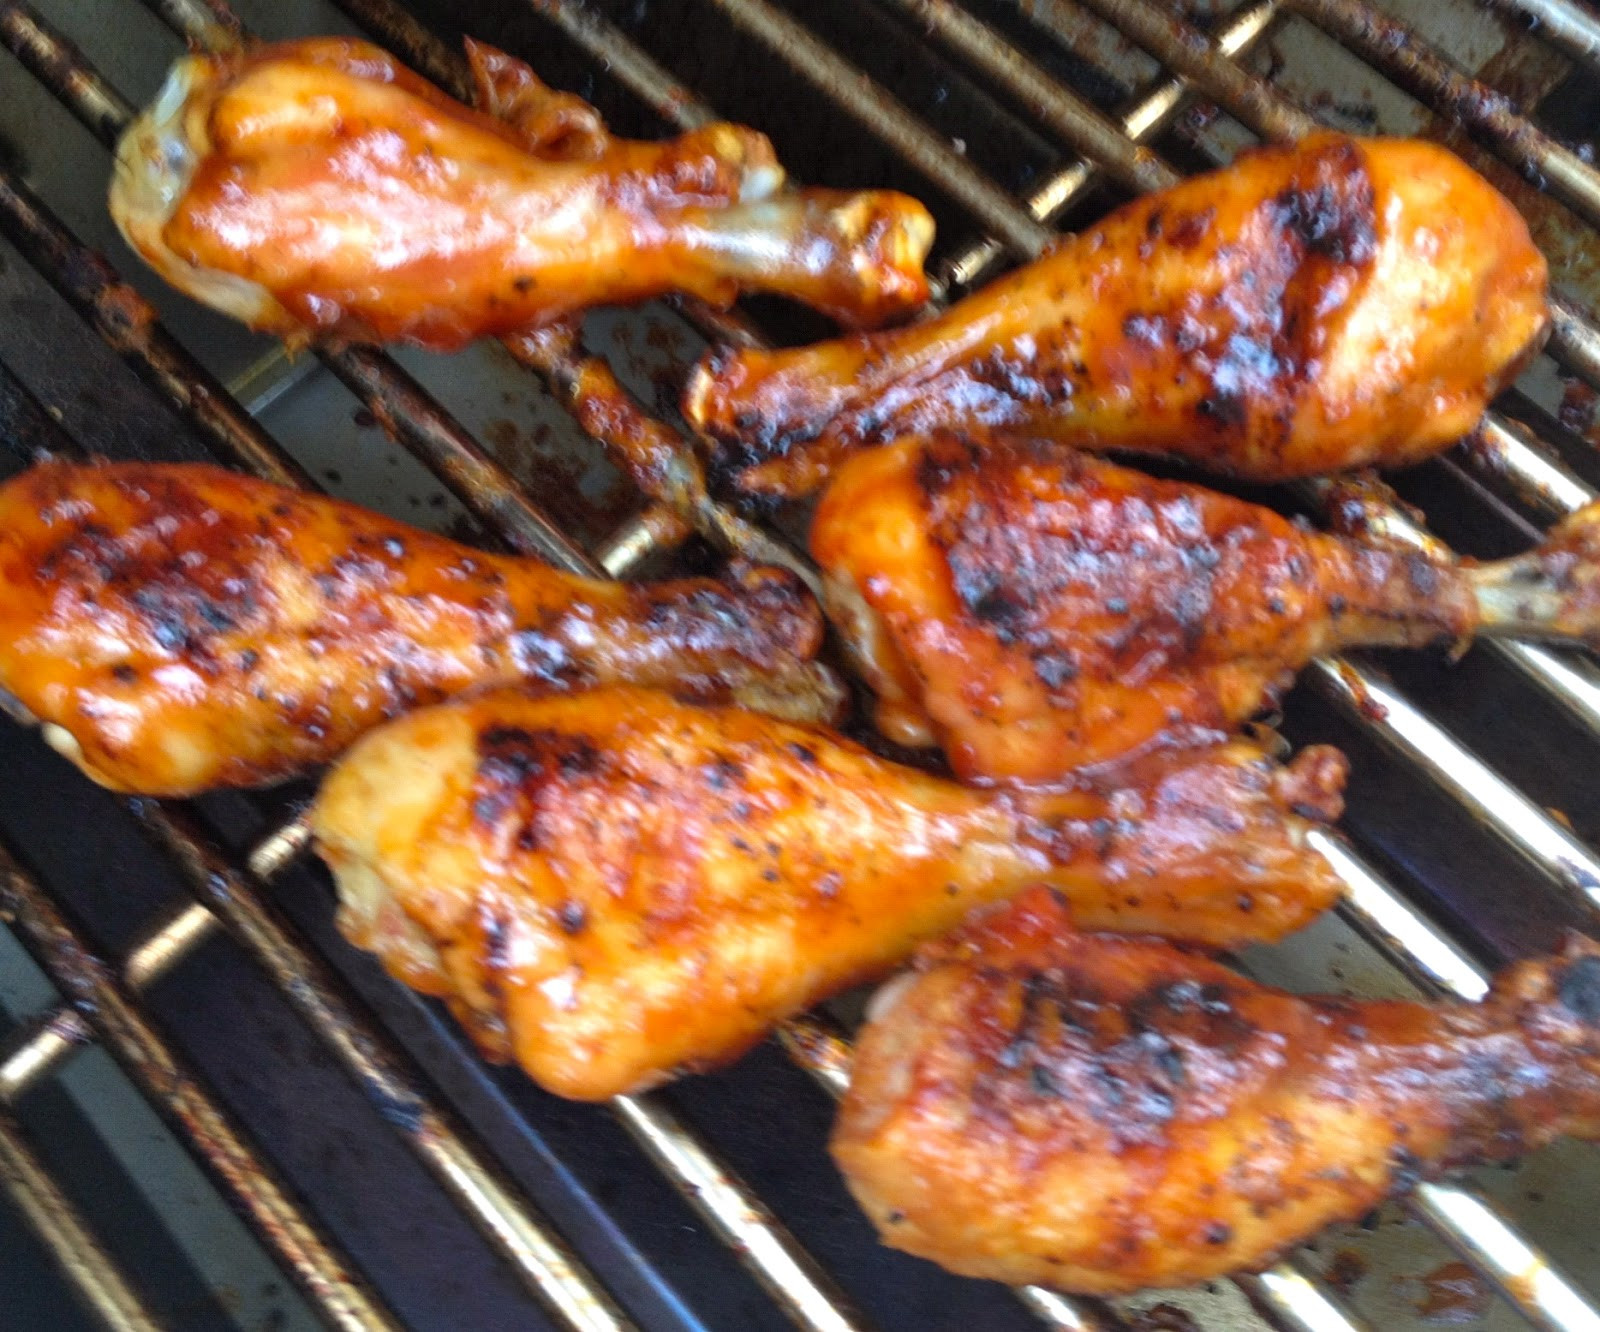 Bbq Chicken Legs On Grill
 BBQ Chicken Legs A Southern Soul